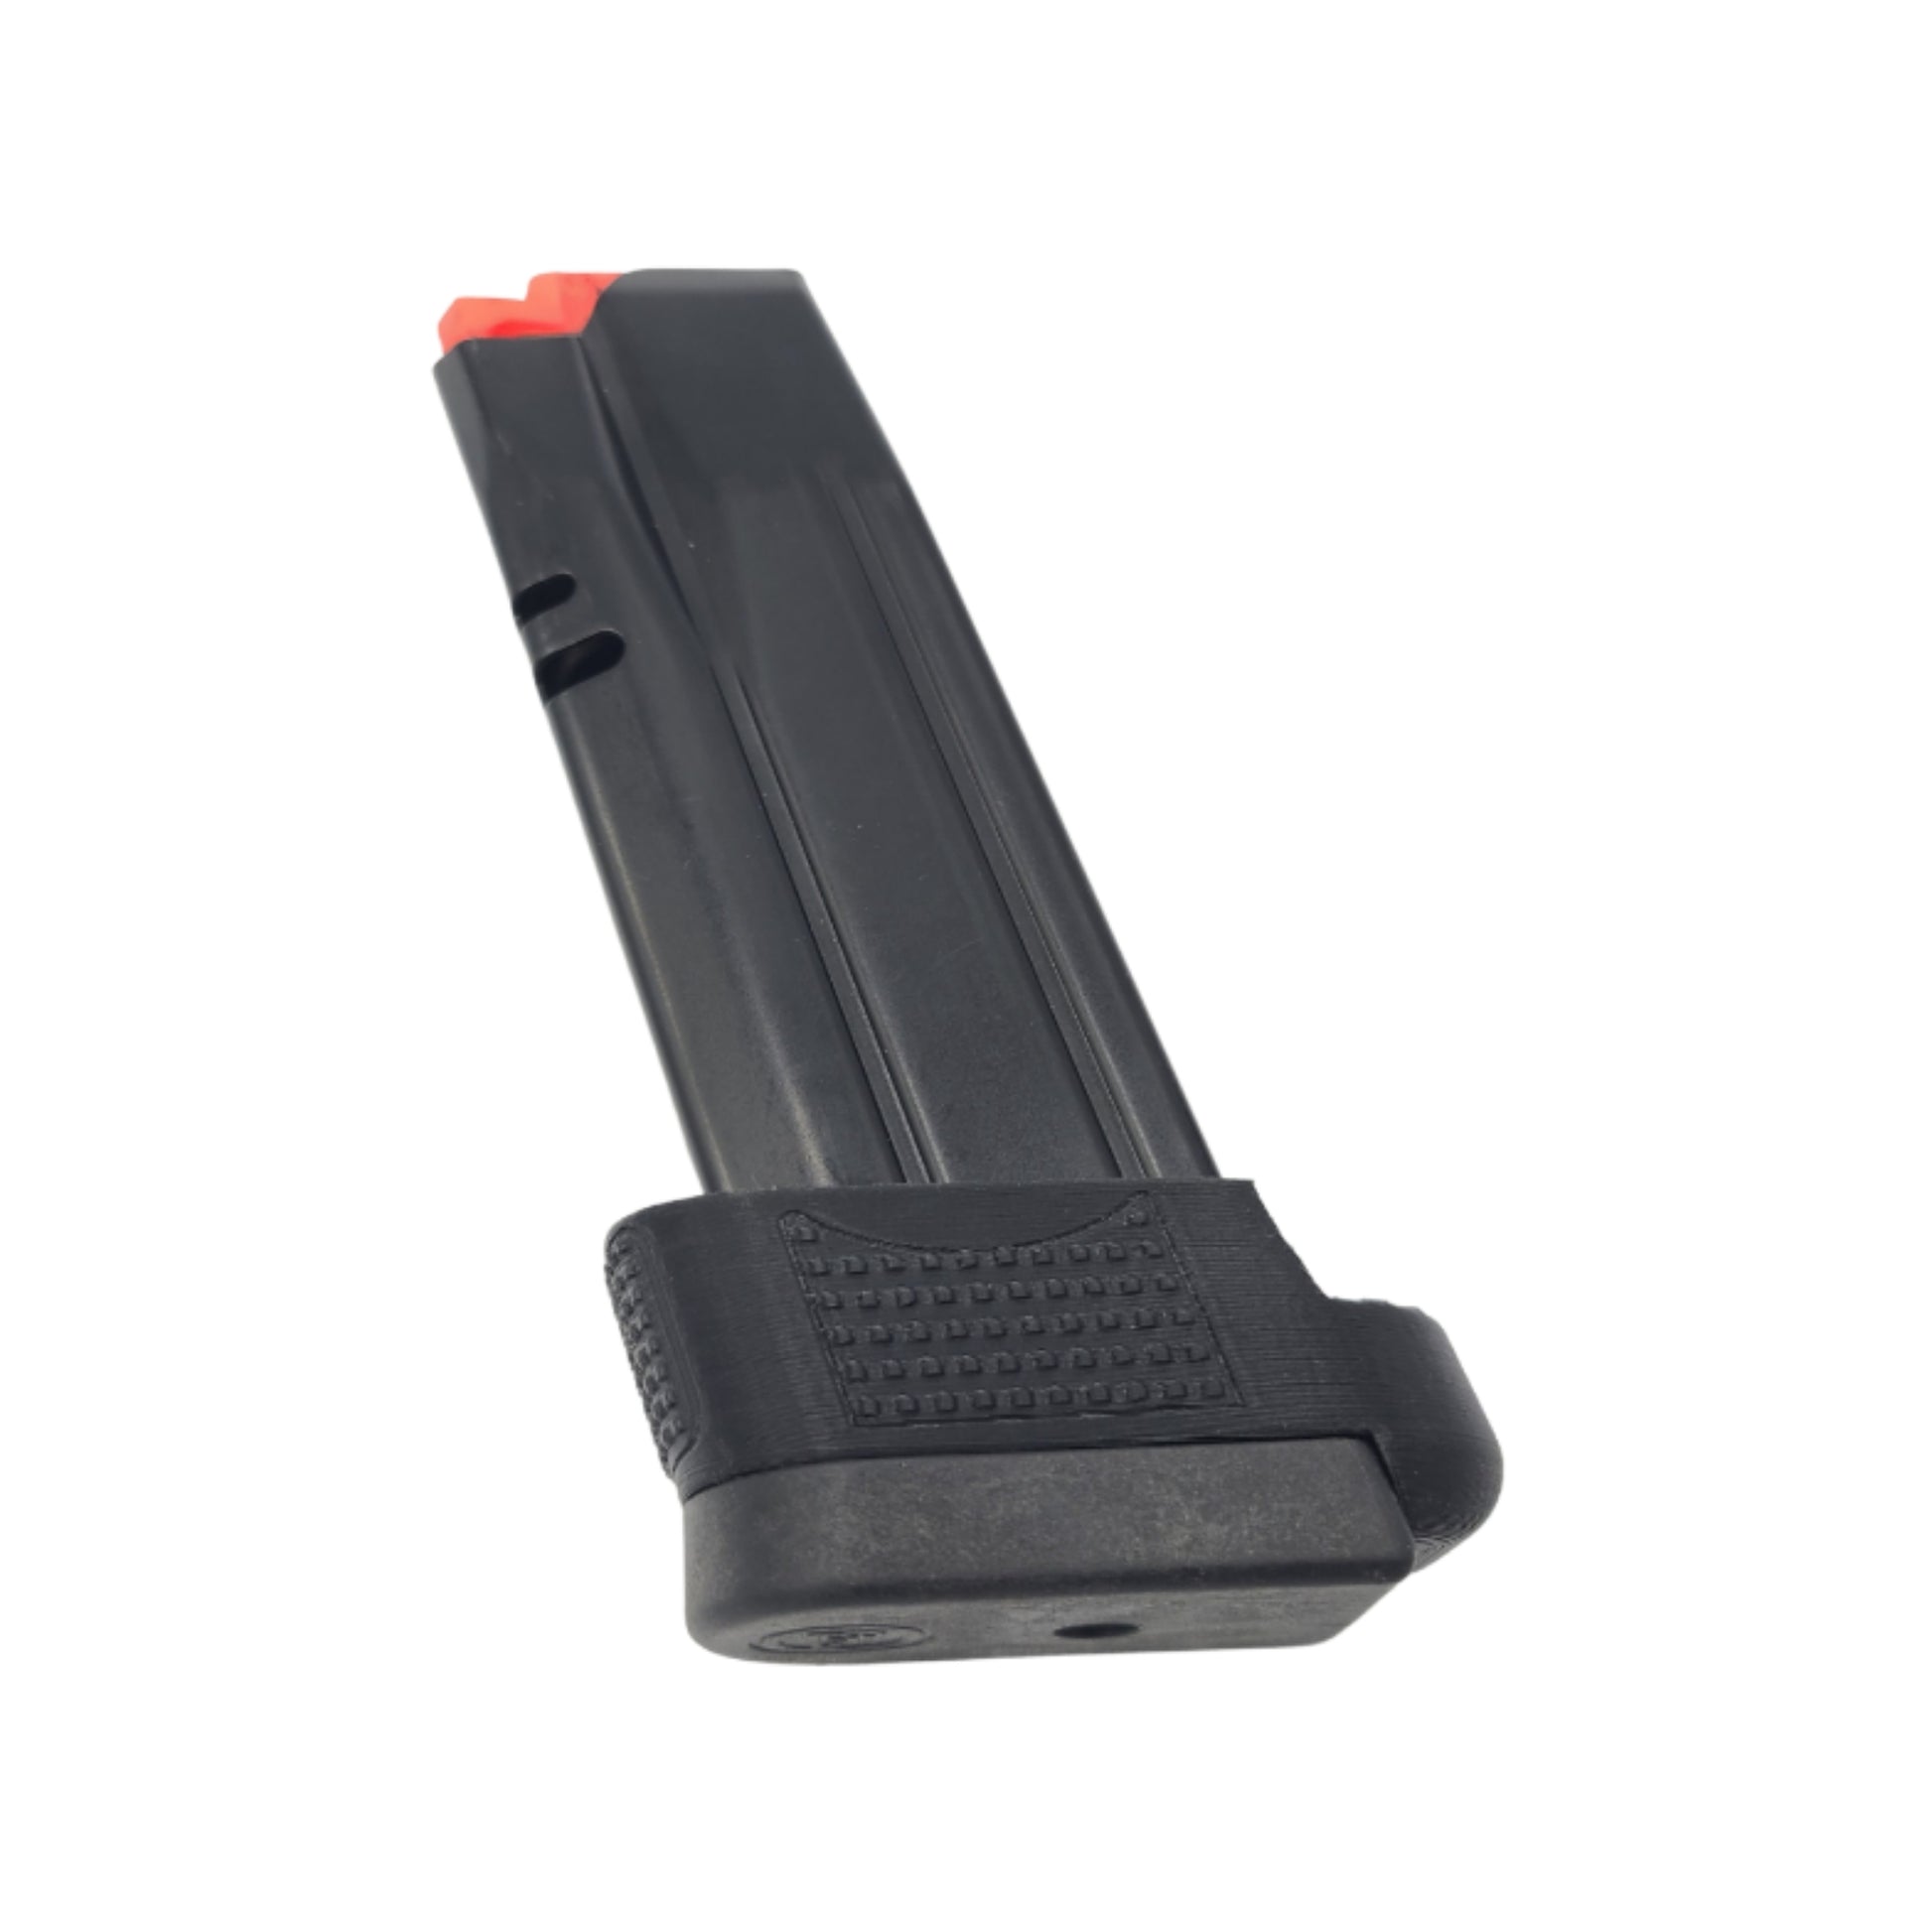 The NULL: CZ P10s 15 Round Magazine Adapter Sleeve – Variant